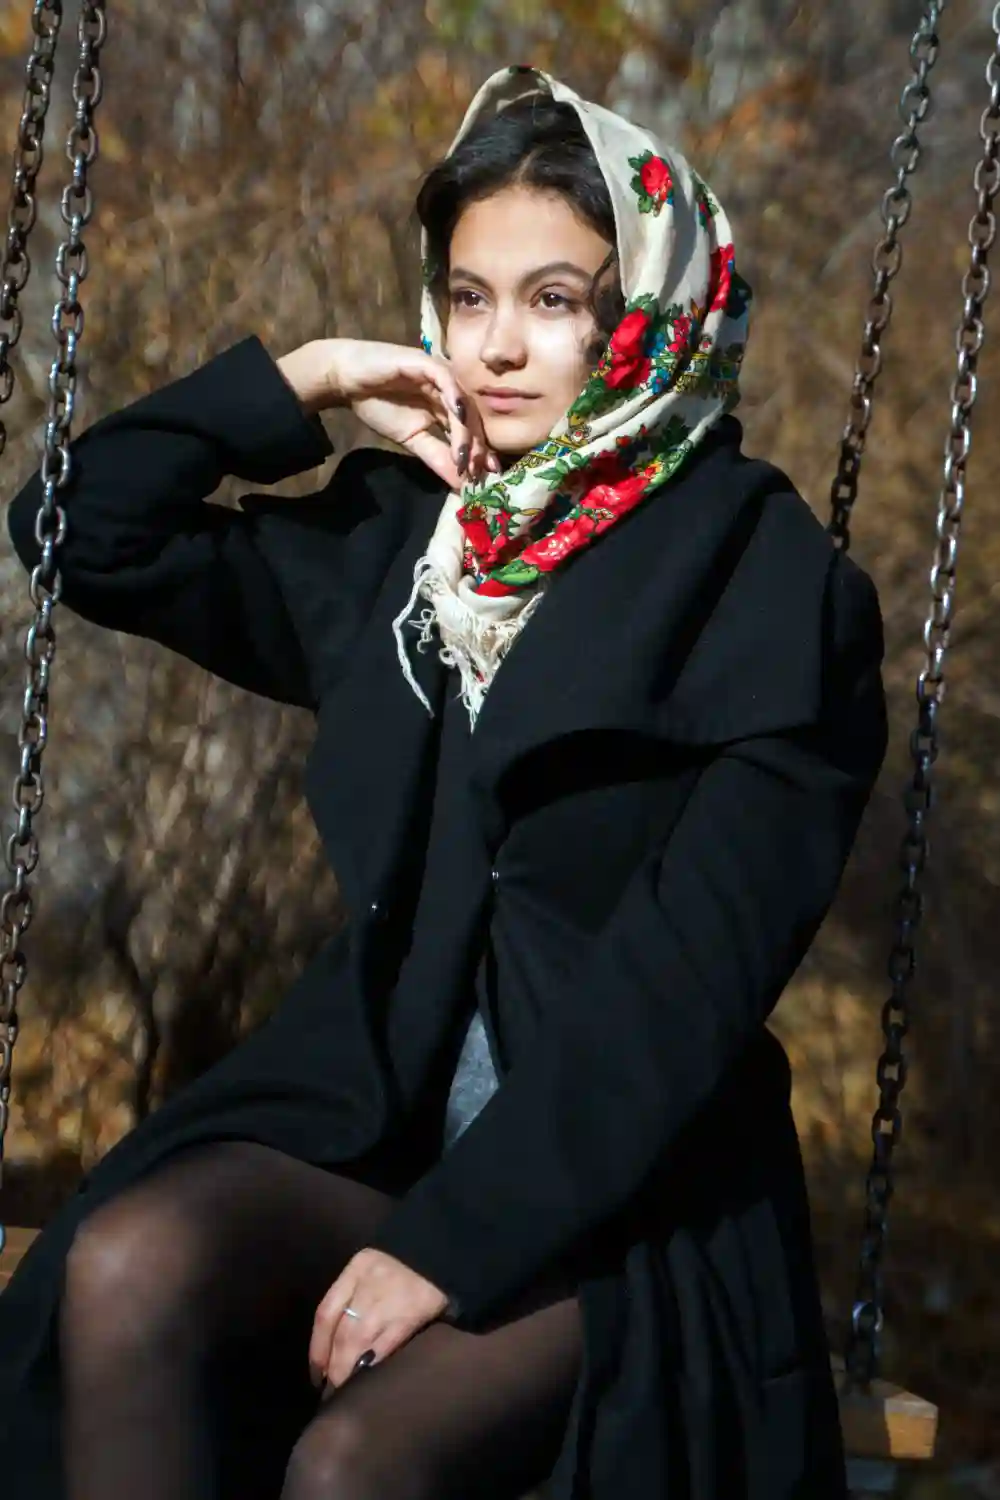 A beautiful girl sits on a swing wearing a traditional Russian headscarf